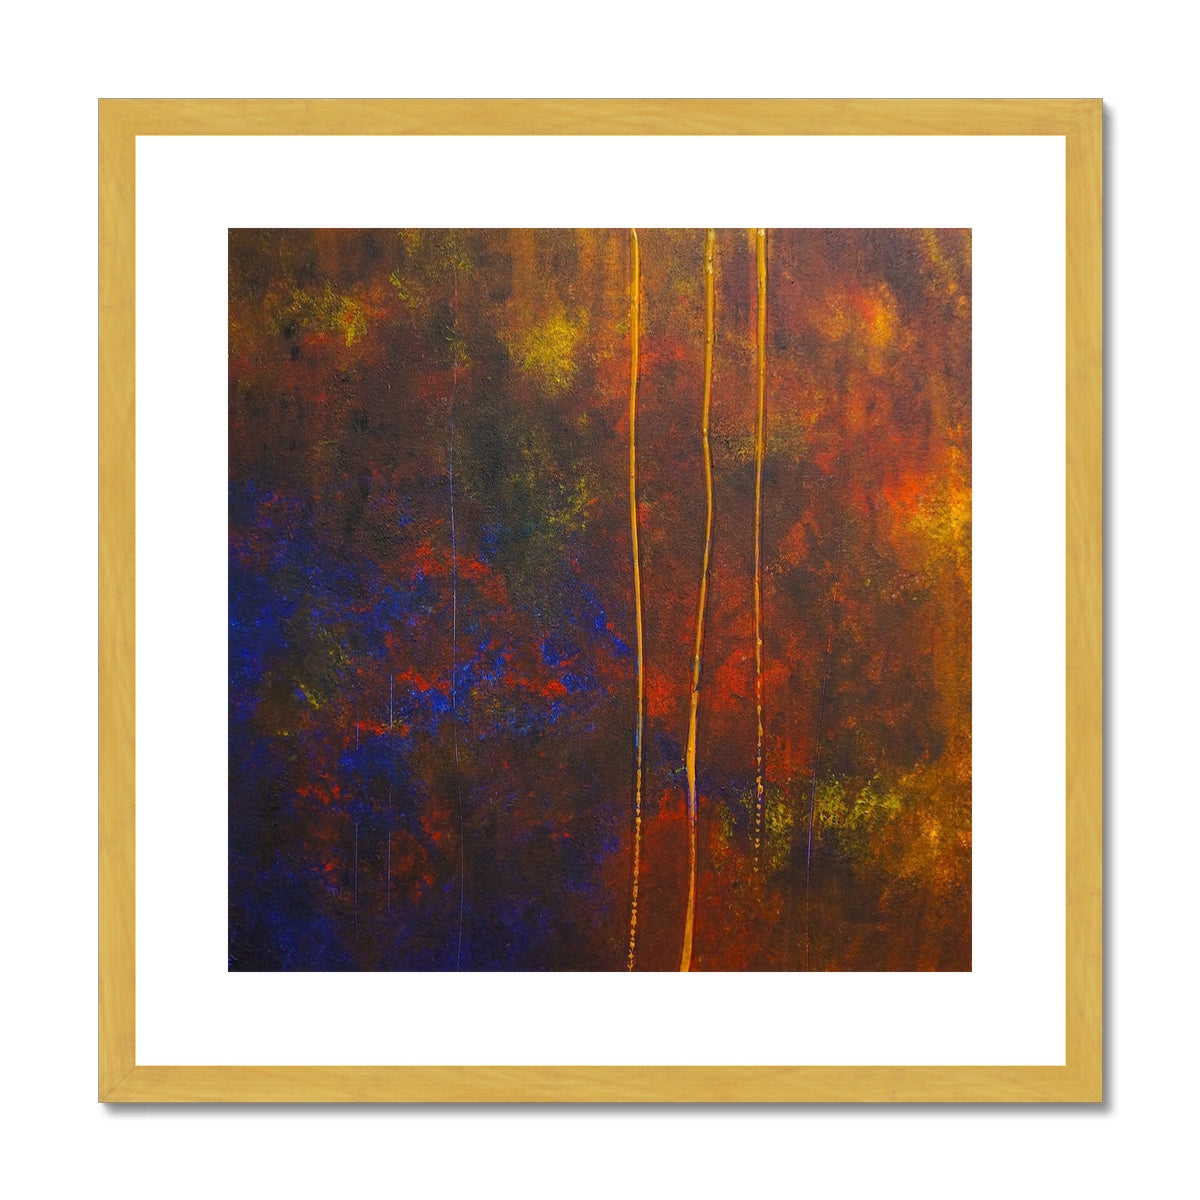 The Autumn Wood Abstract Painting | Antique Framed & Mounted Prints From Scotland-Antique Framed & Mounted Prints-Abstract & Impressionistic Art Gallery-20"x20"-Gold Frame-Paintings, Prints, Homeware, Art Gifts From Scotland By Scottish Artist Kevin Hunter